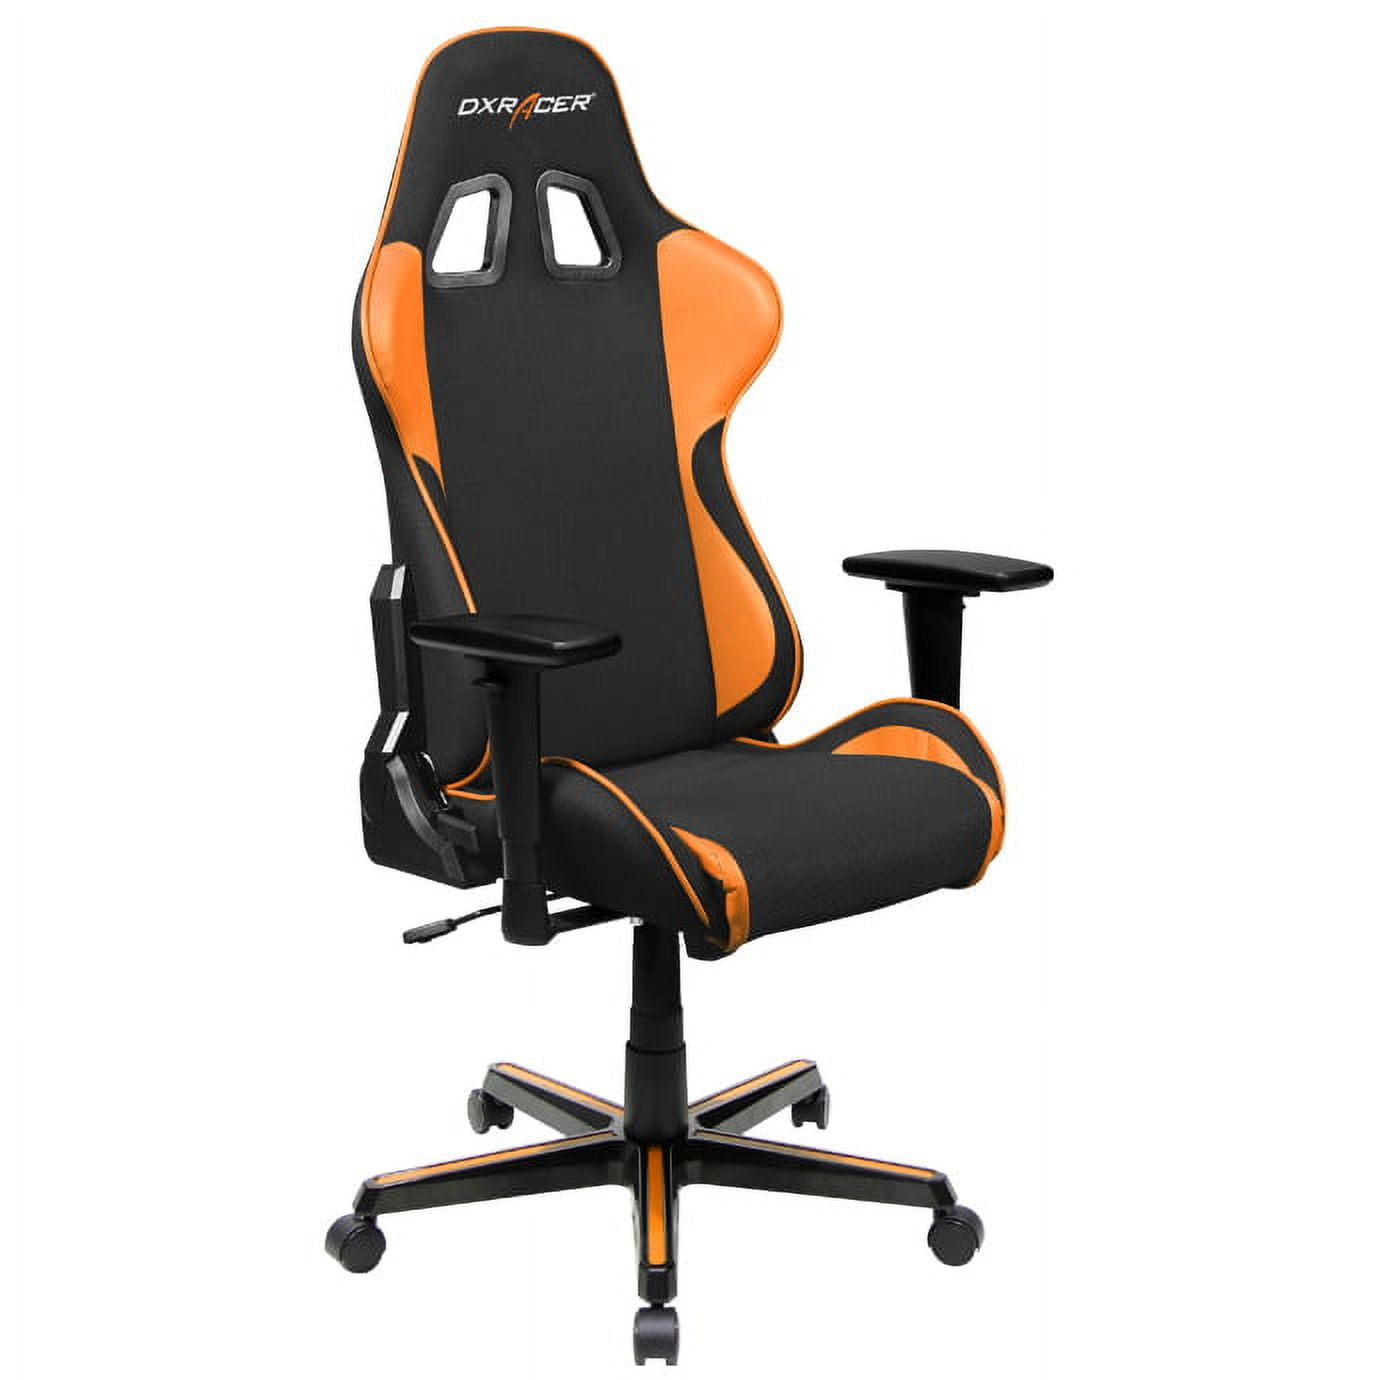 DX Racer DXRacer Formula Series OH/FH11/N Series High-Back Gaming Chair  Ergonomic Office Desk Chair(Multi Colors) 